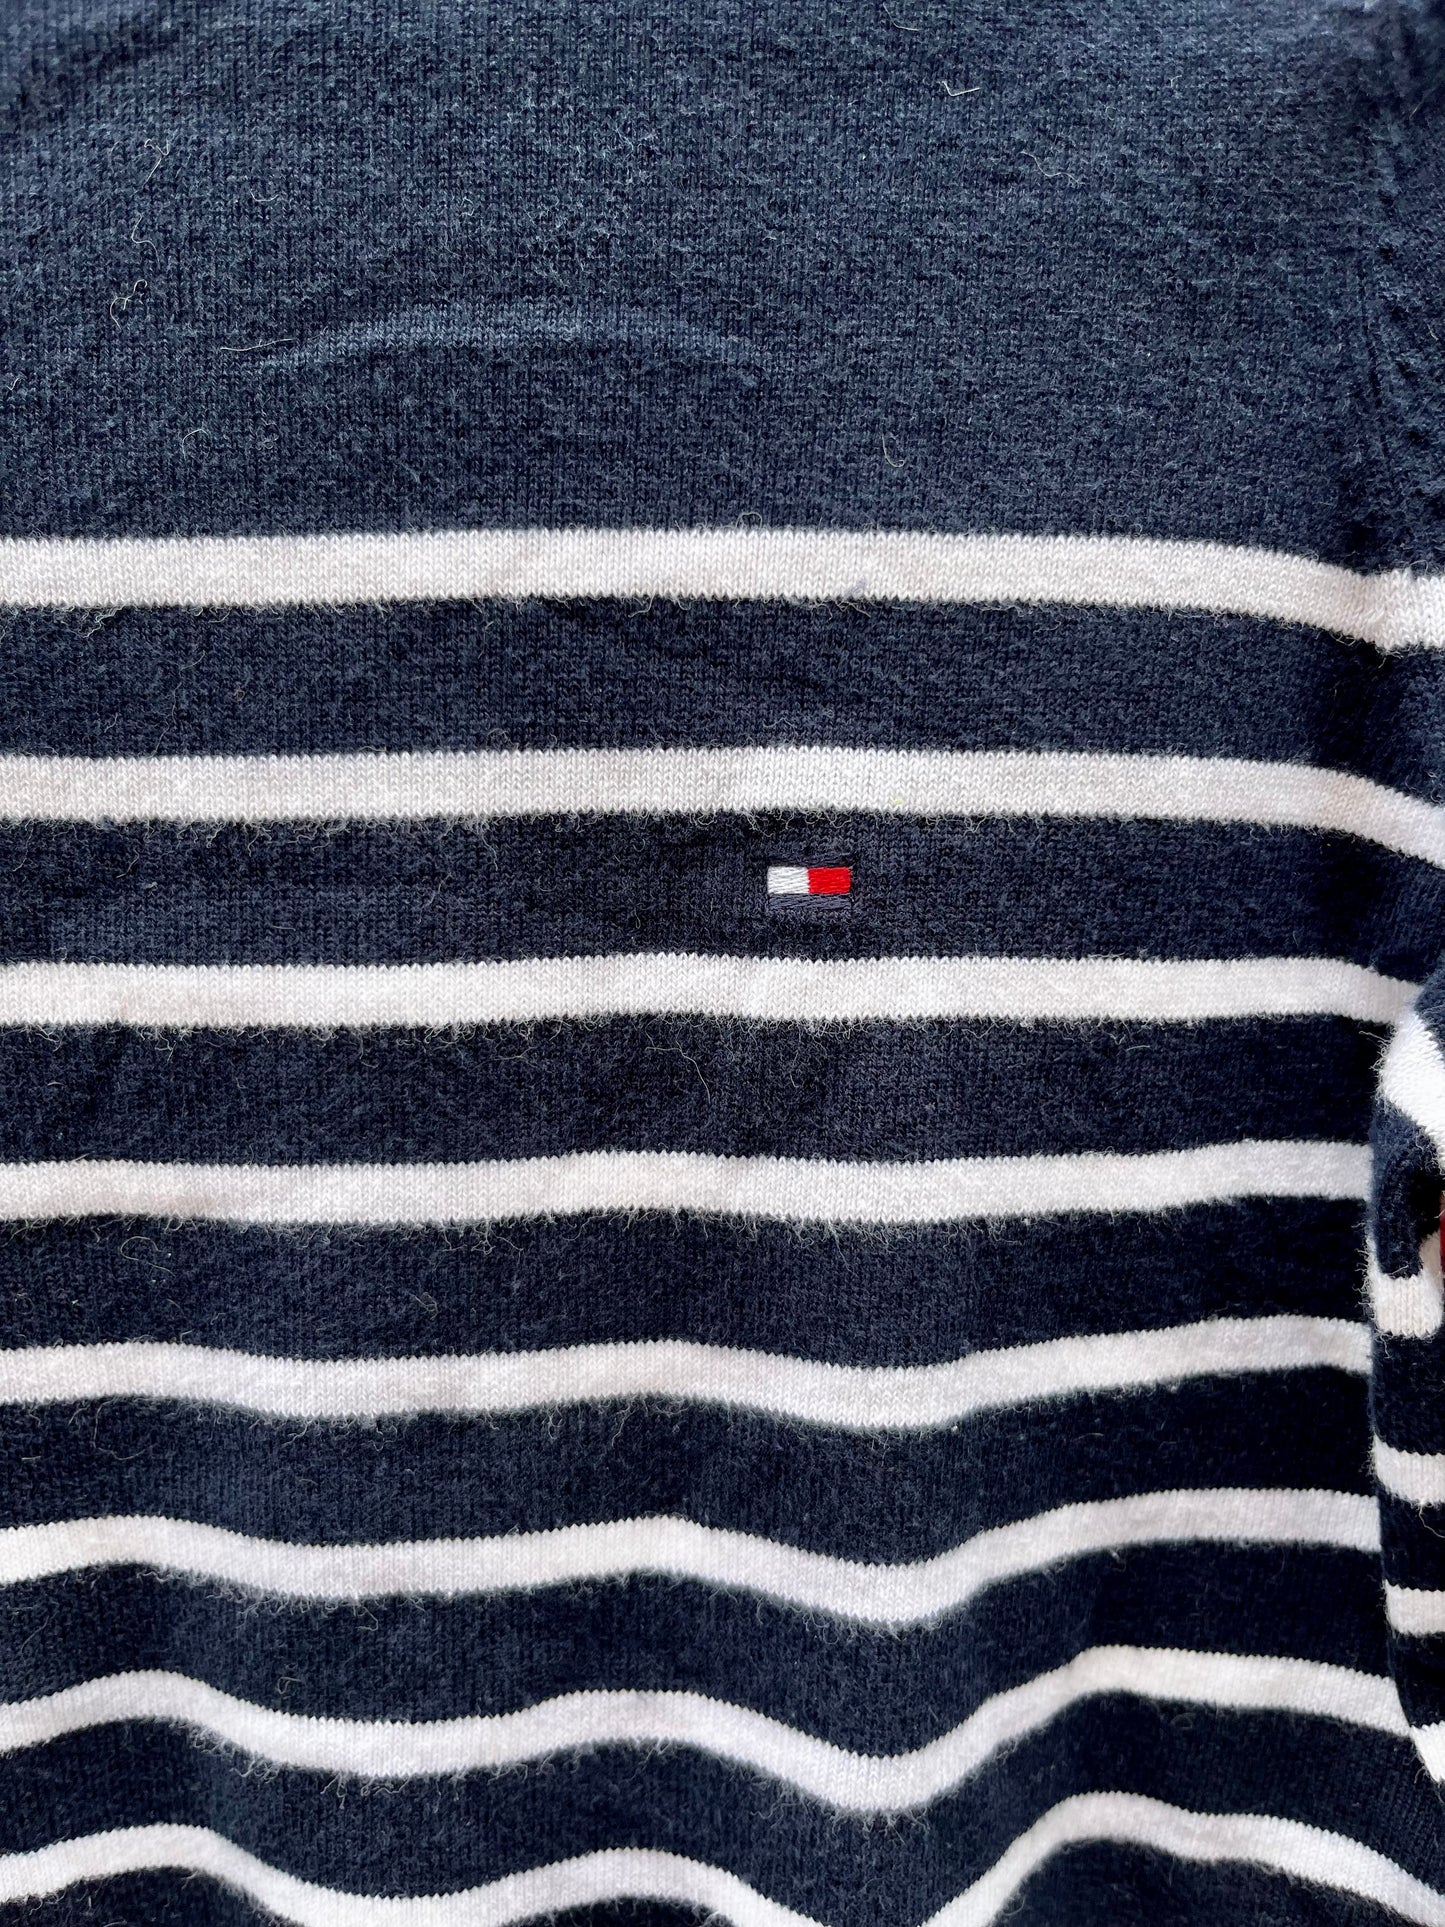 Le pull marinière, TOMMY HILFIGER, taille 34